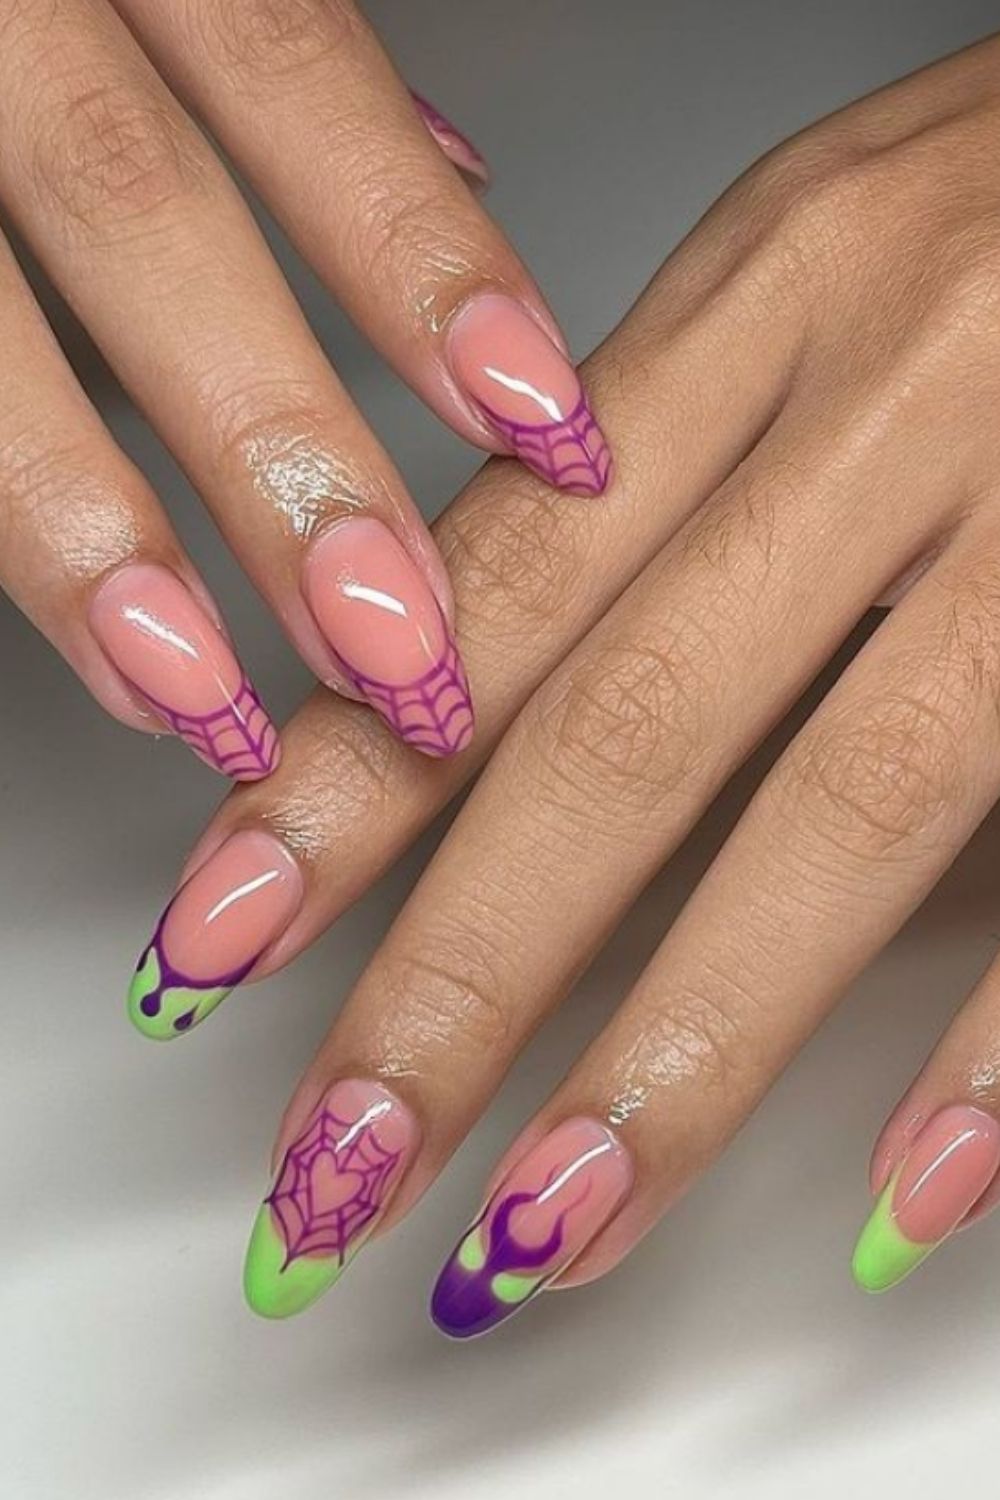 Funny and weird nails